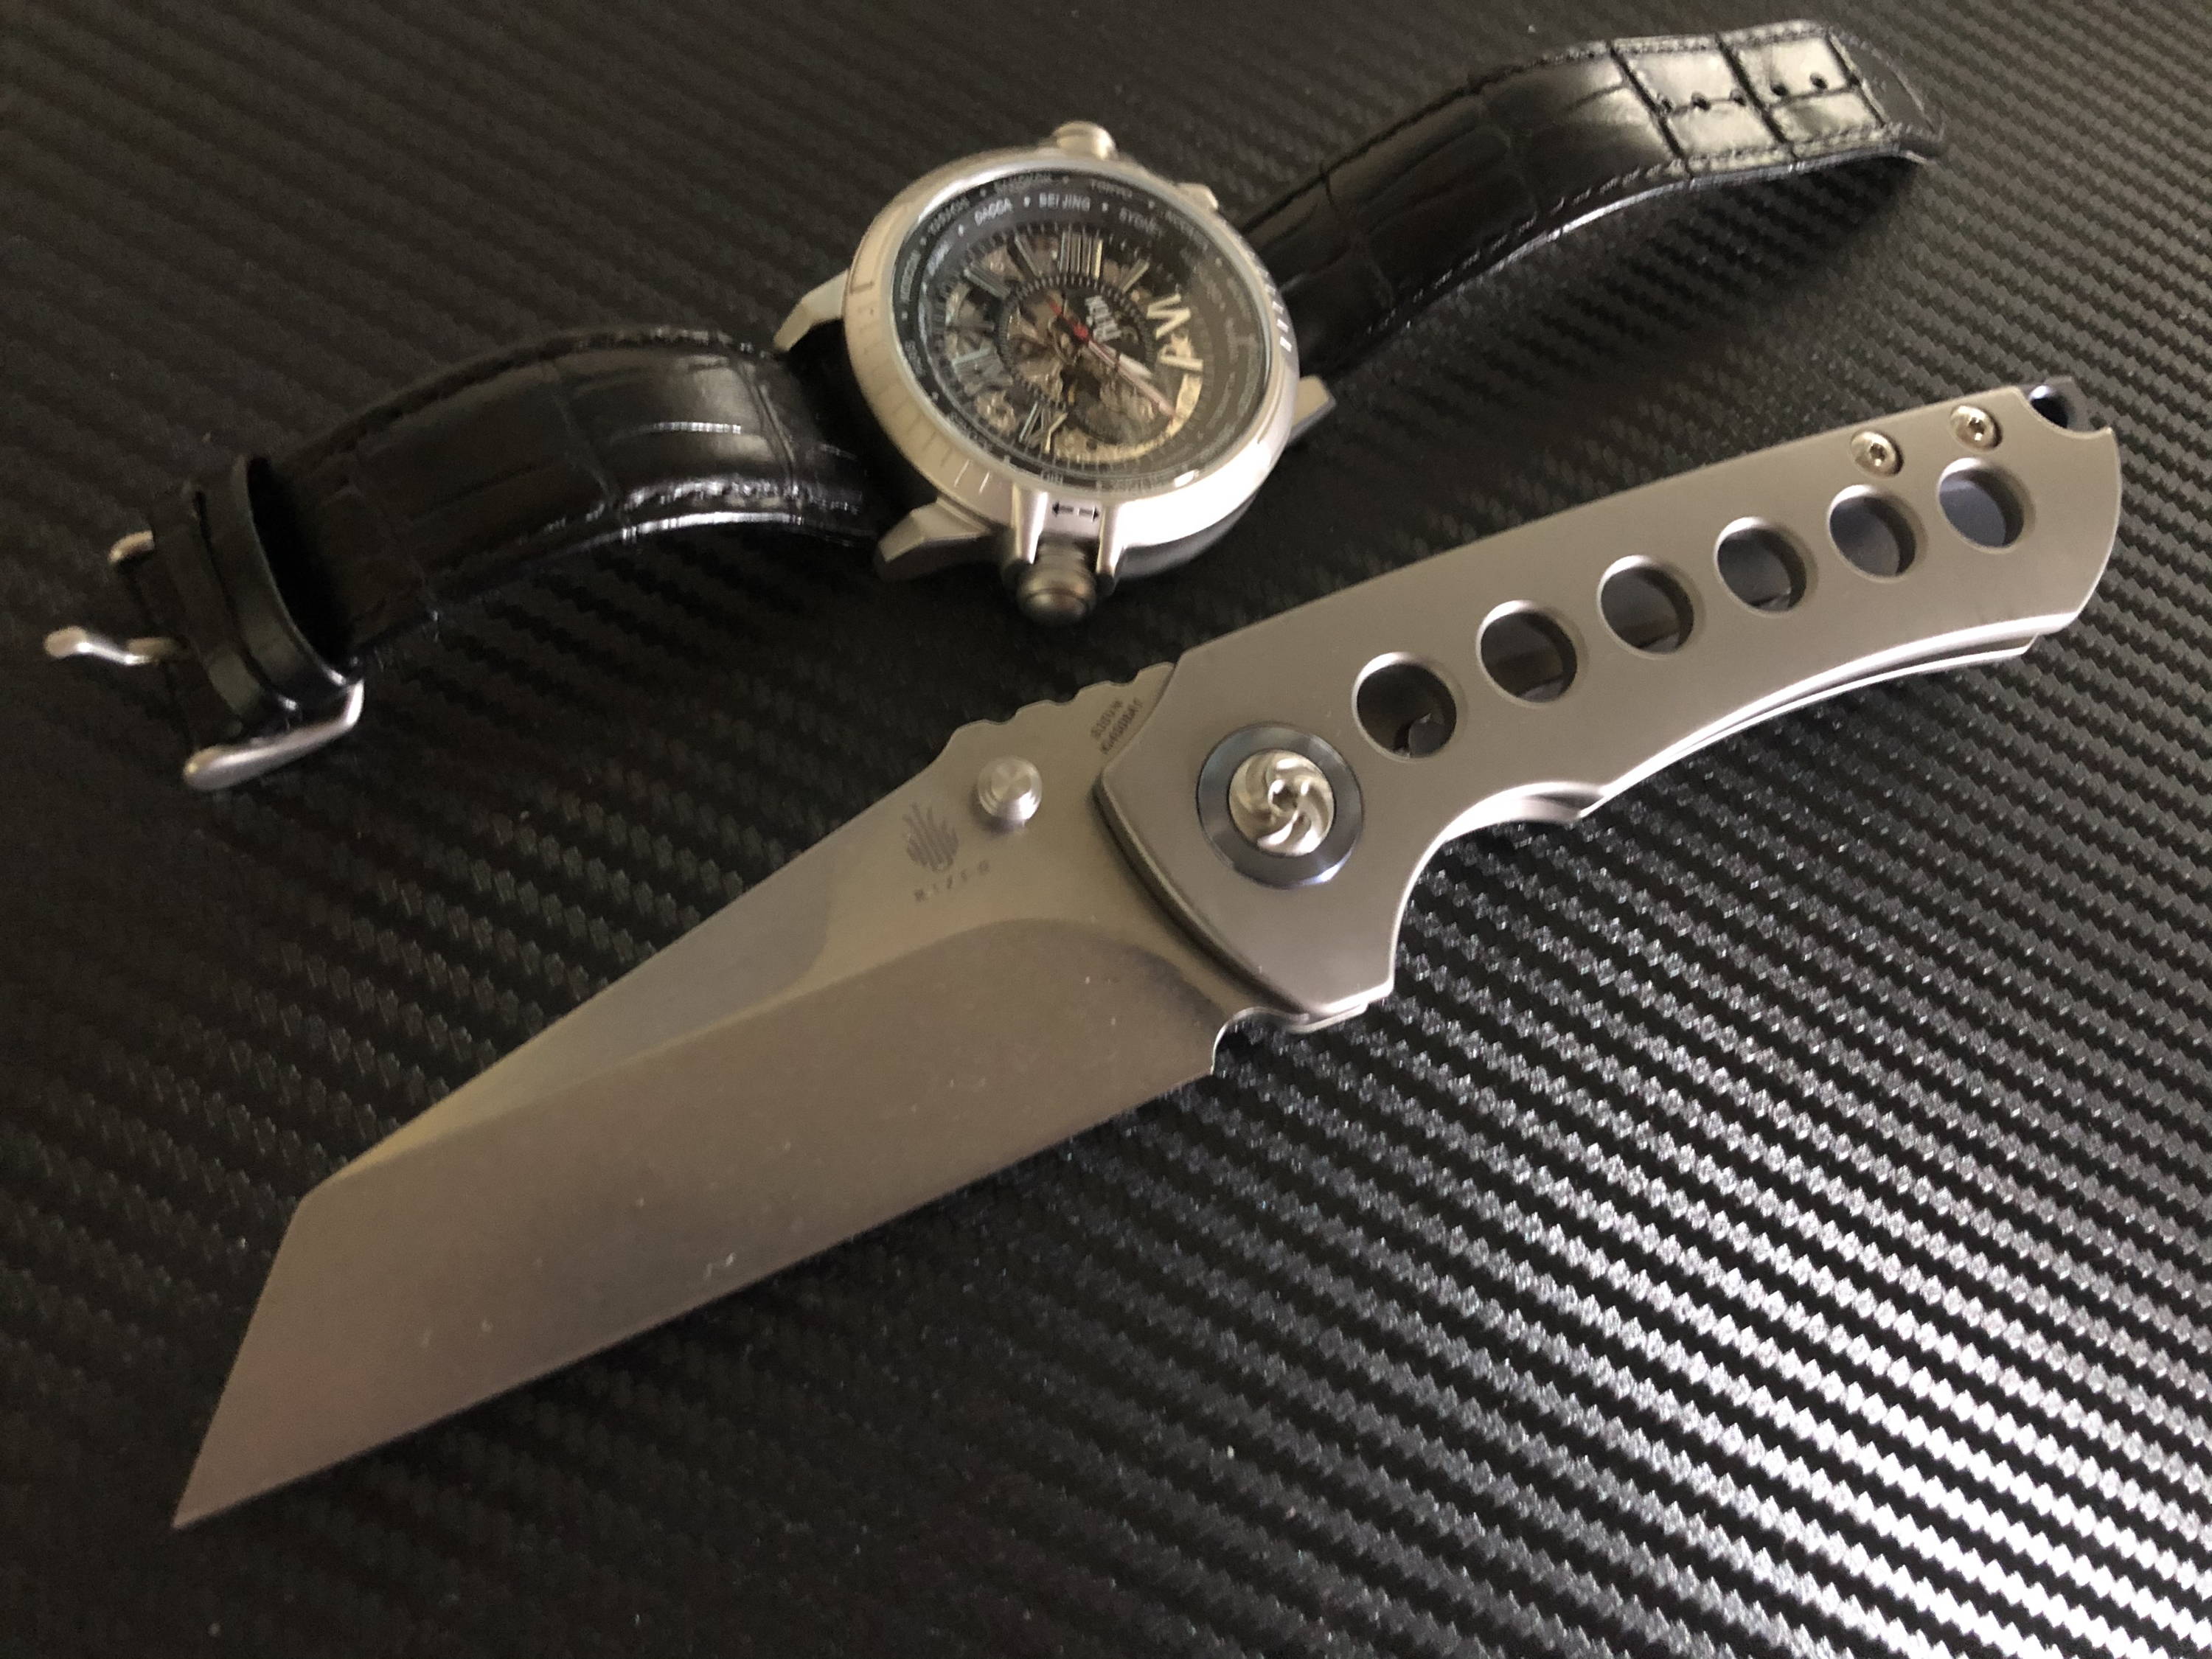 Knife & Watch Subscription - Monthly Knife Club